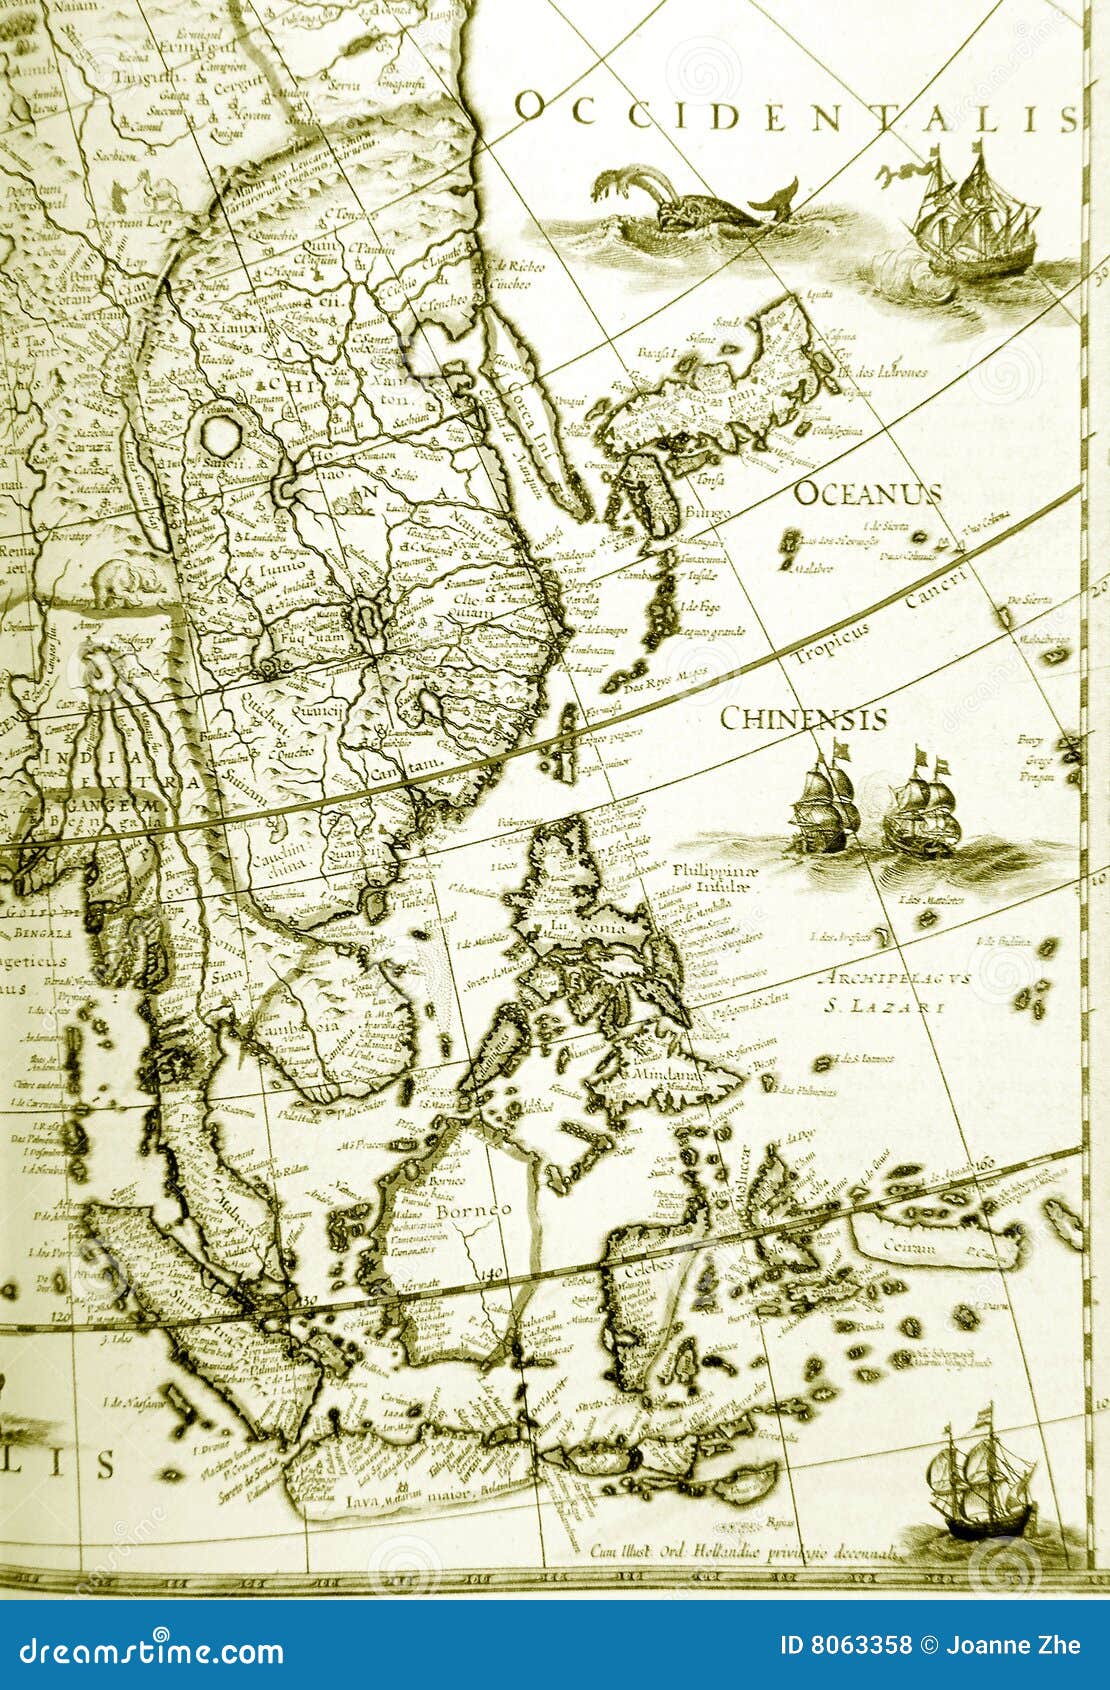 Maps of southeast asia countries, old antique